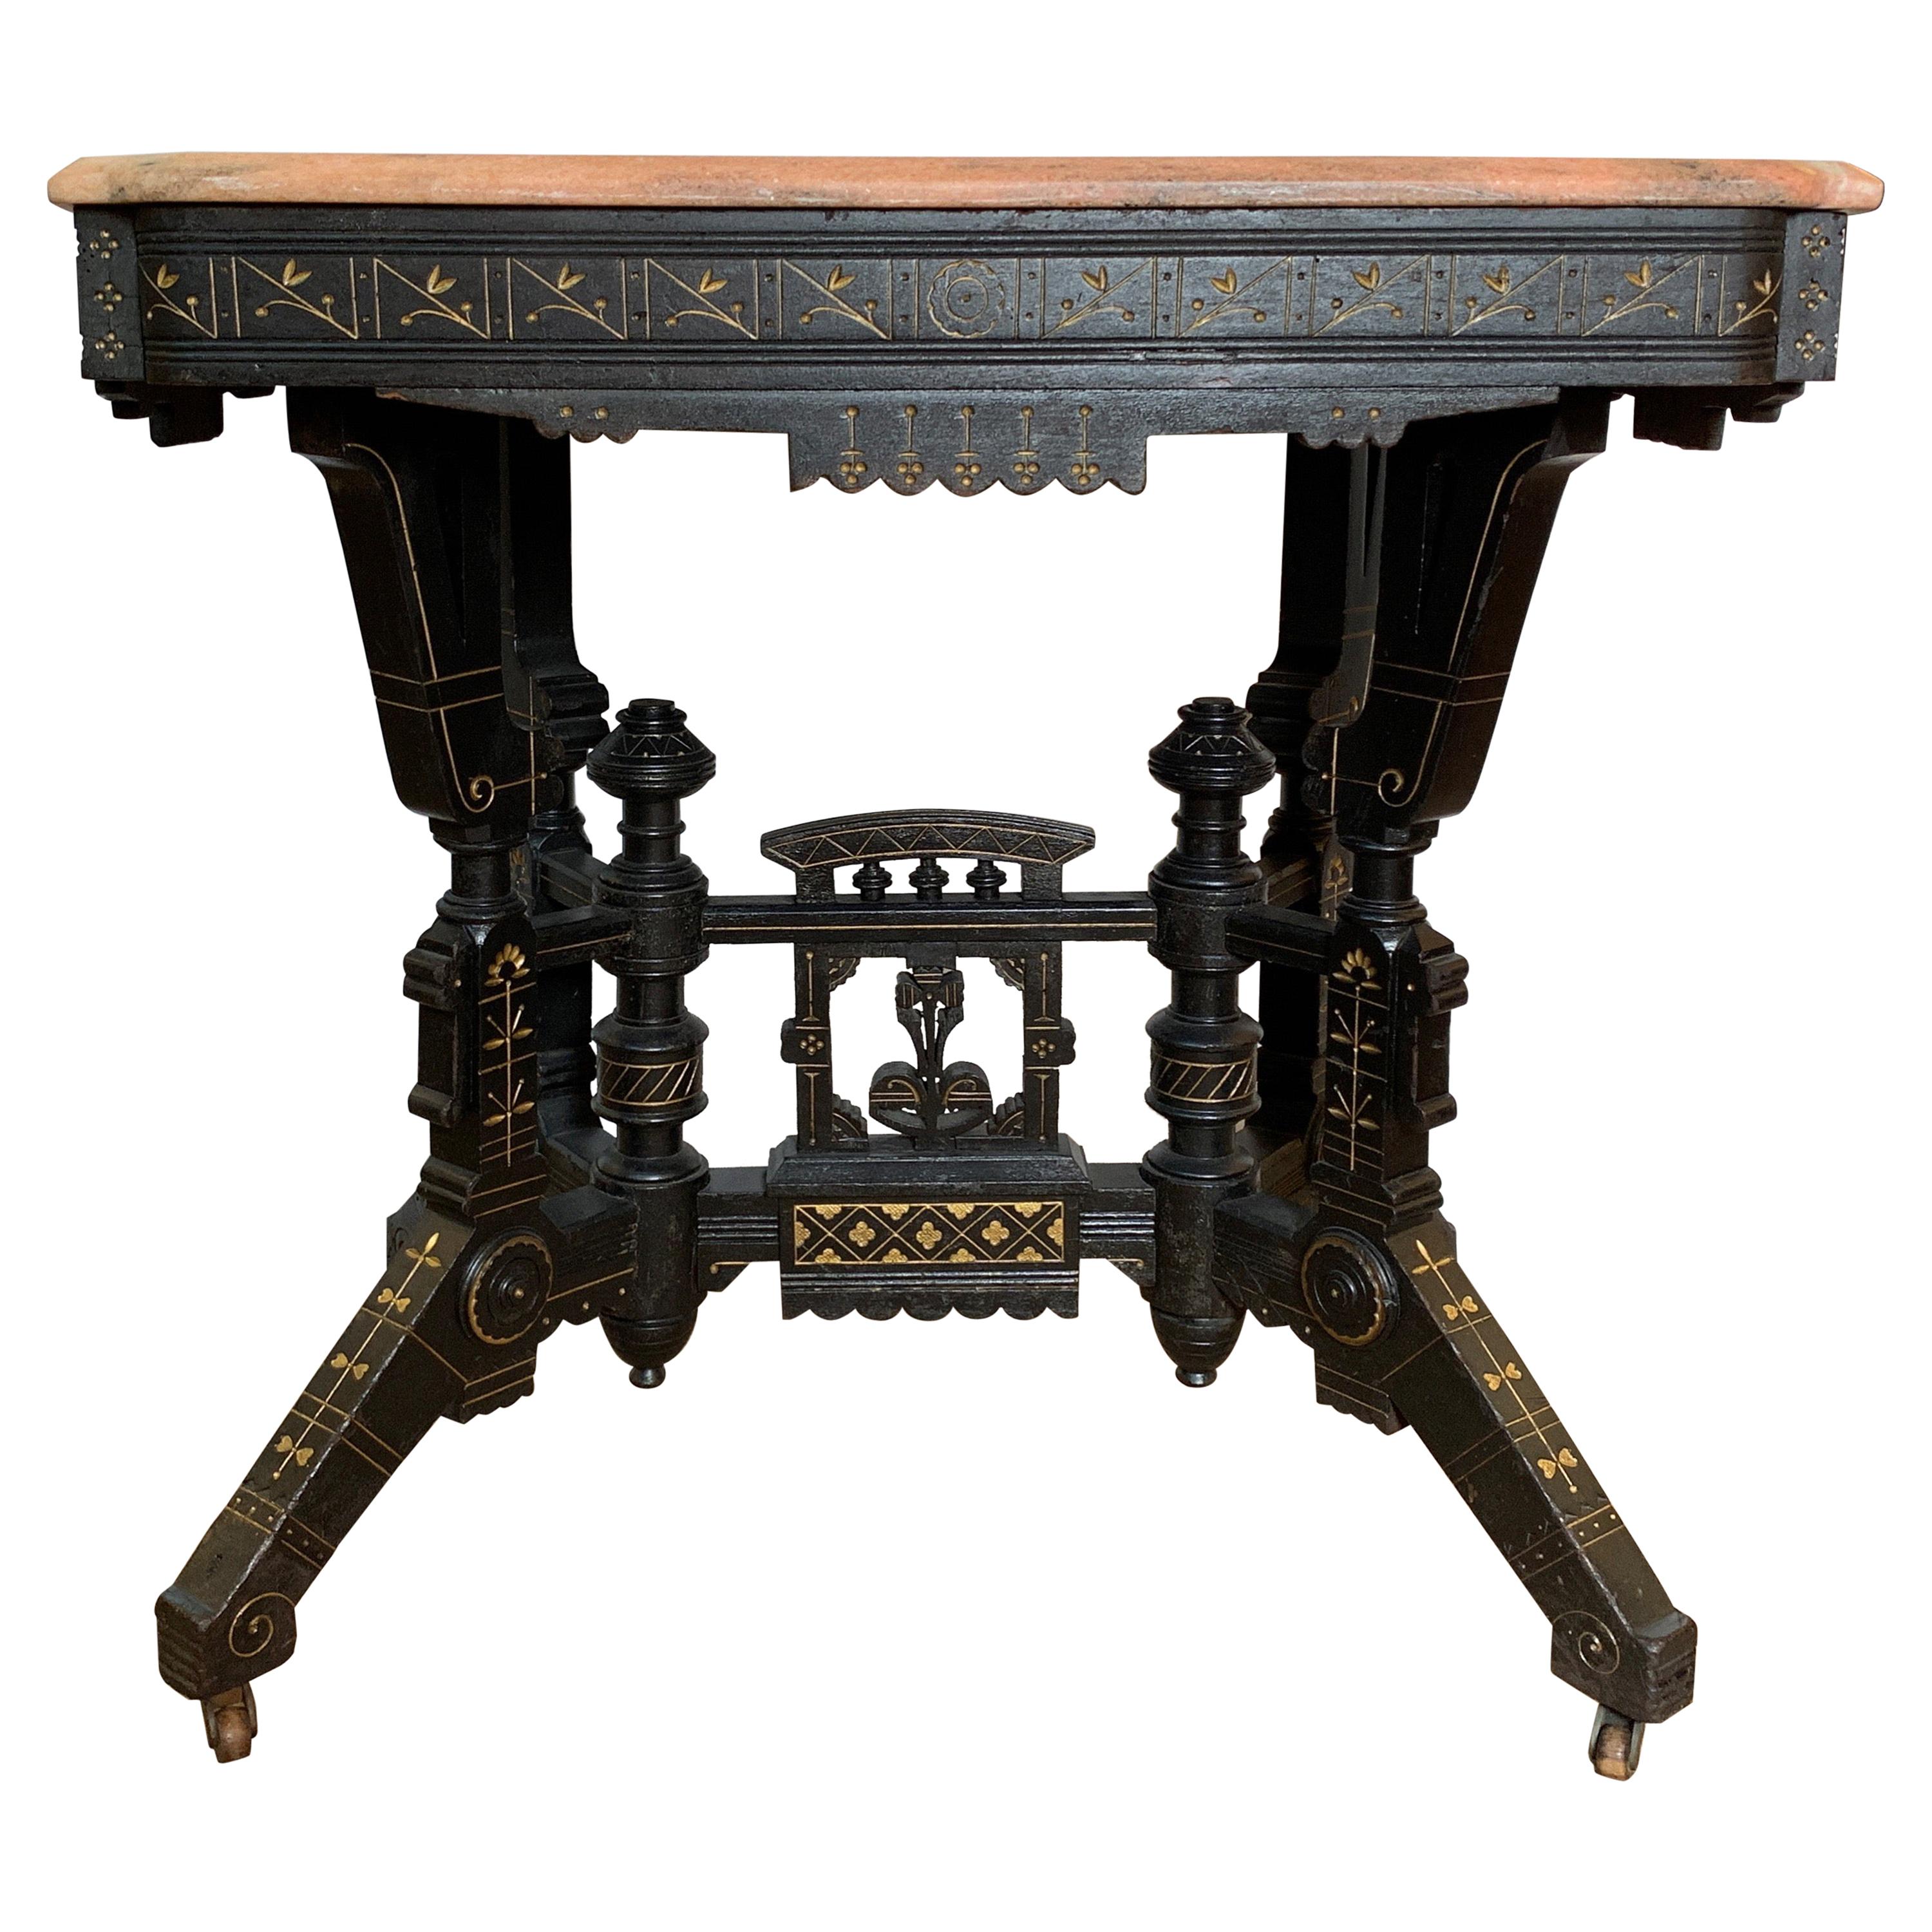 Ebonized Aesthetic Movement Parlor Table with Pink Marble Top and Gold Decor